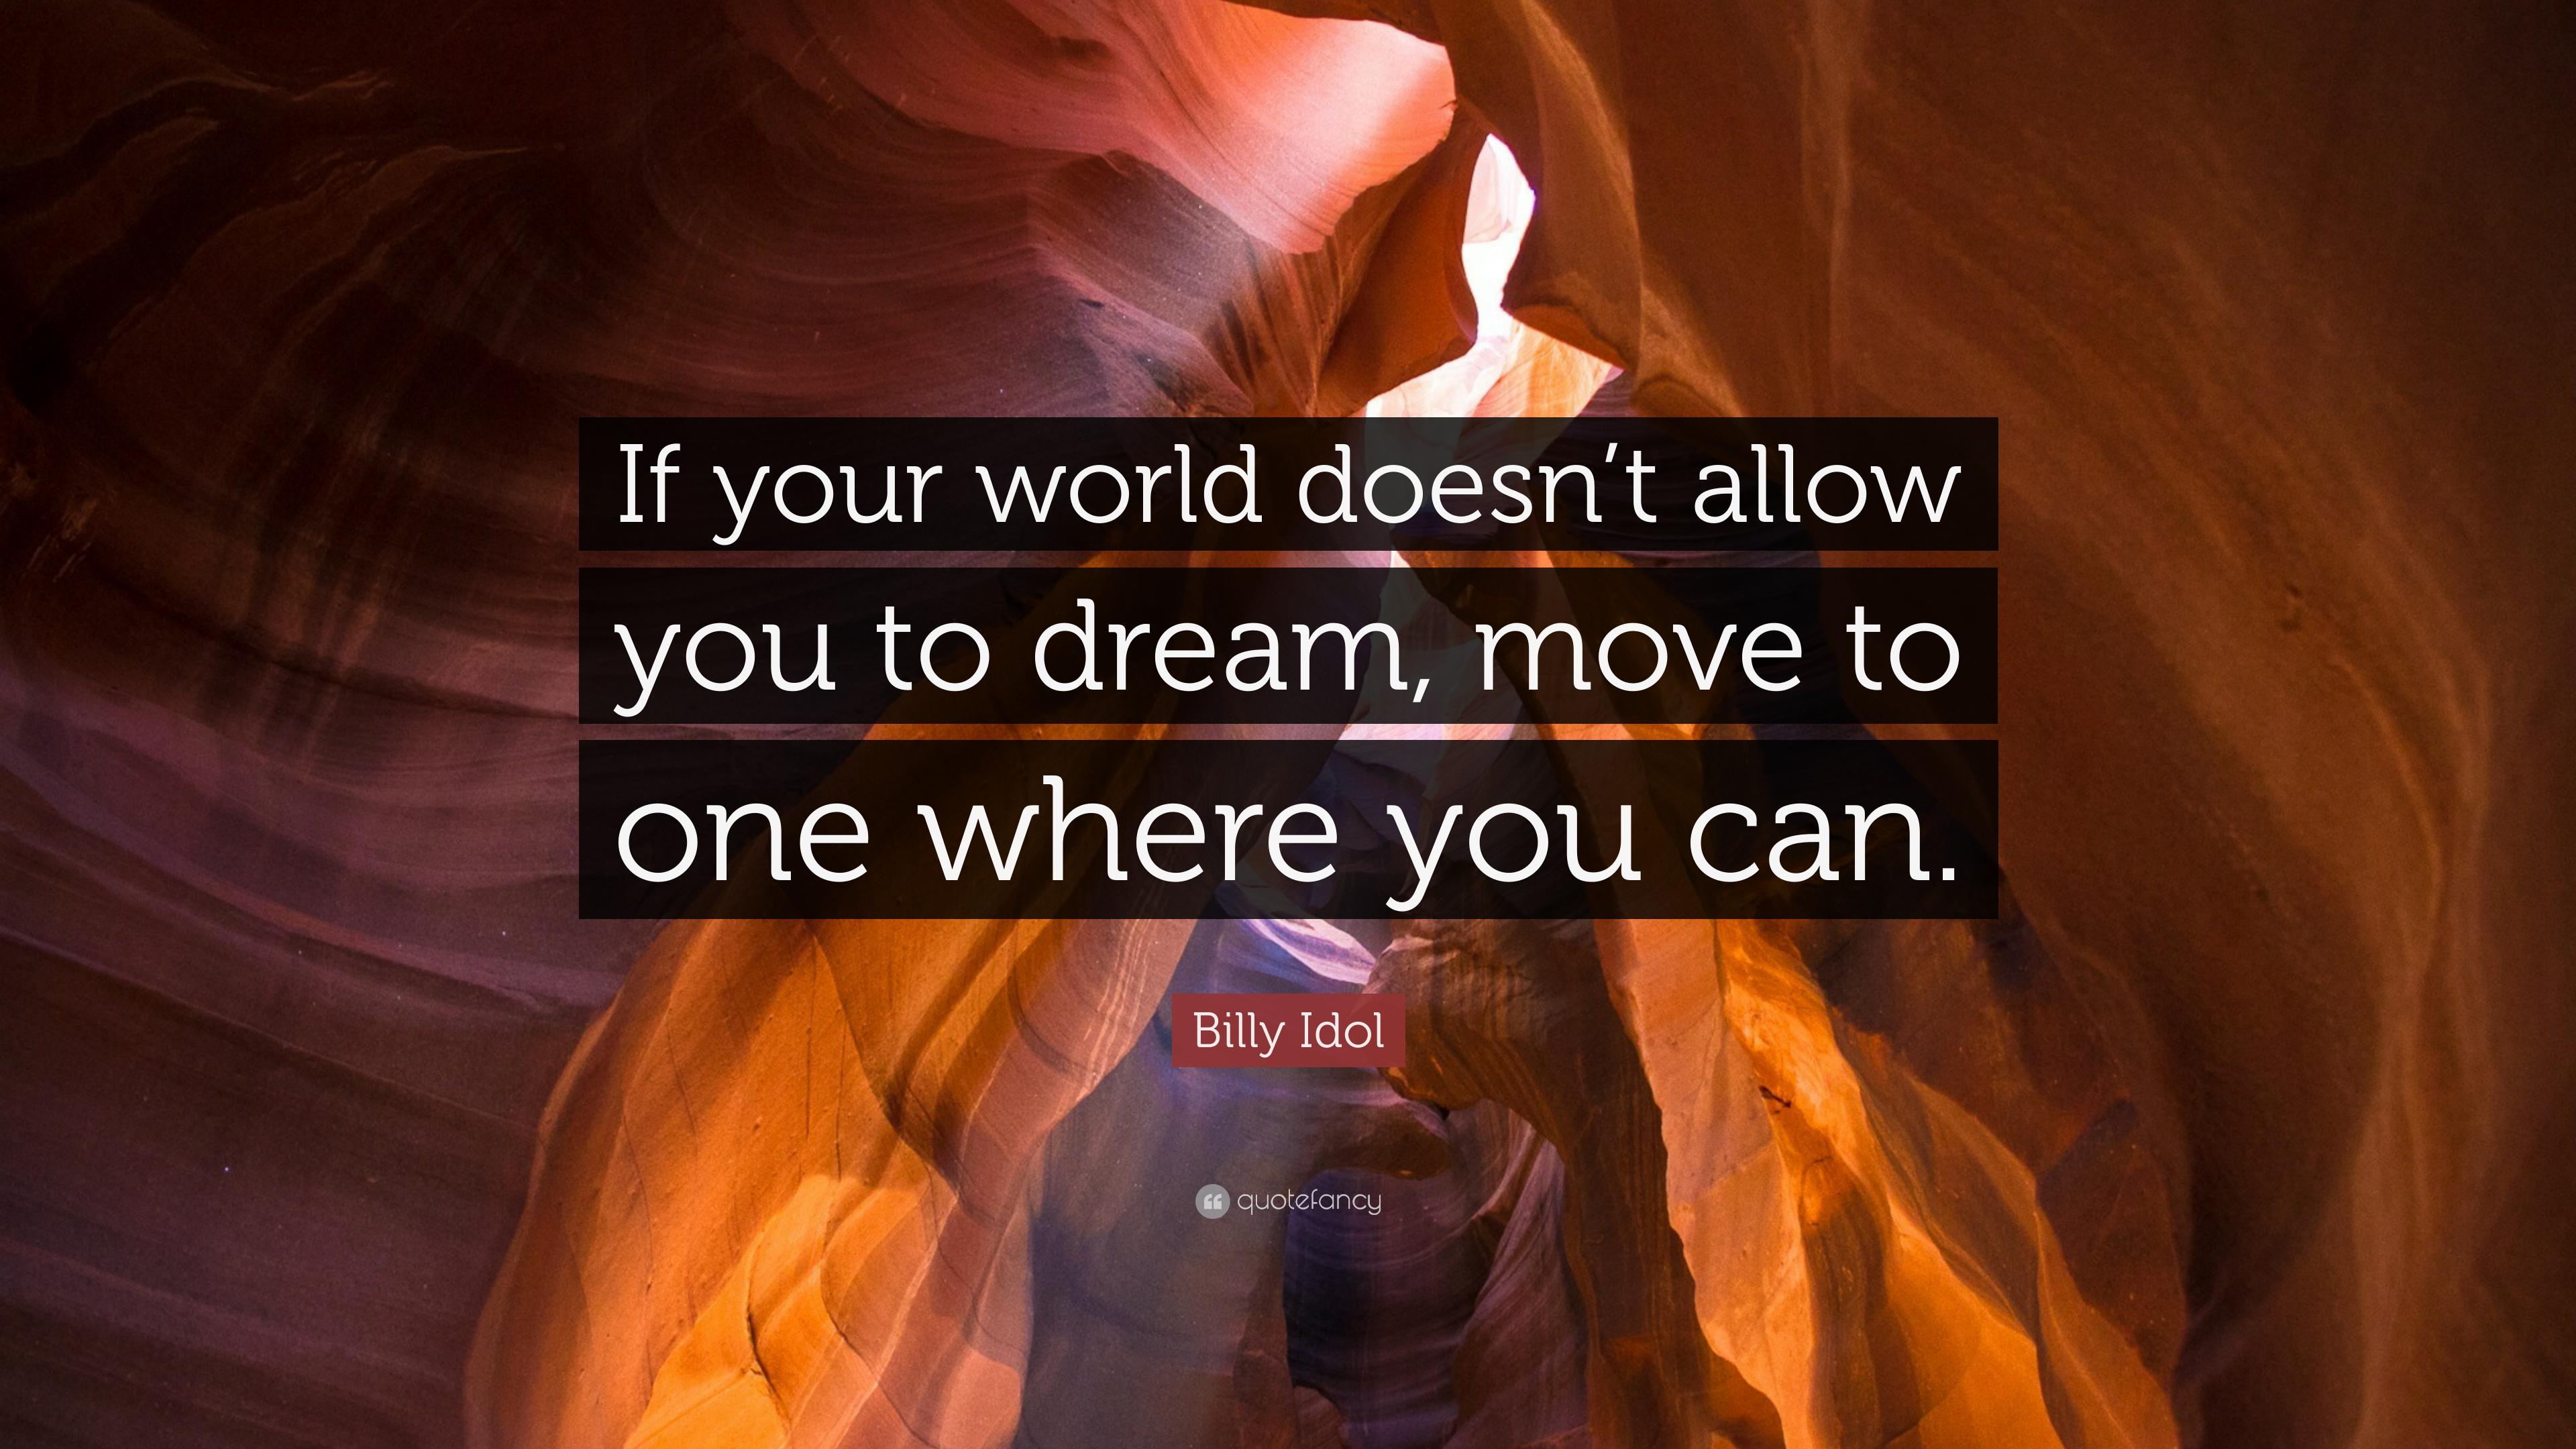 Billy Idol Quote: “If your world doesn't allow you to dream